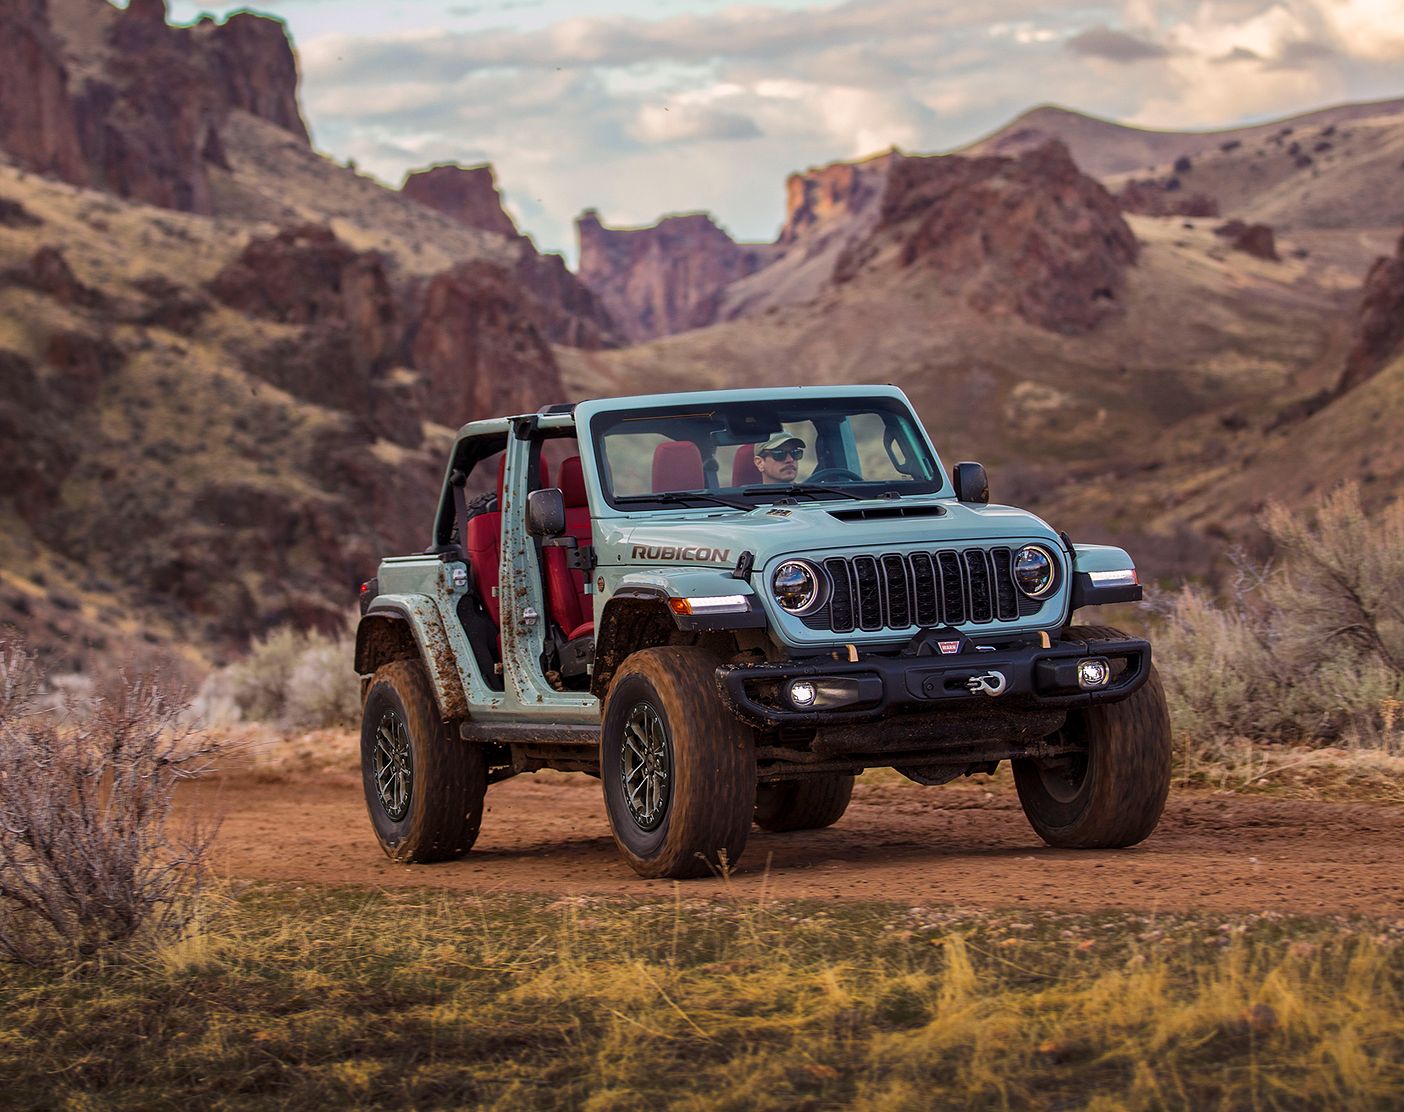 Accessorize your 2021 Jeep Wrangler 4xe with these new performance